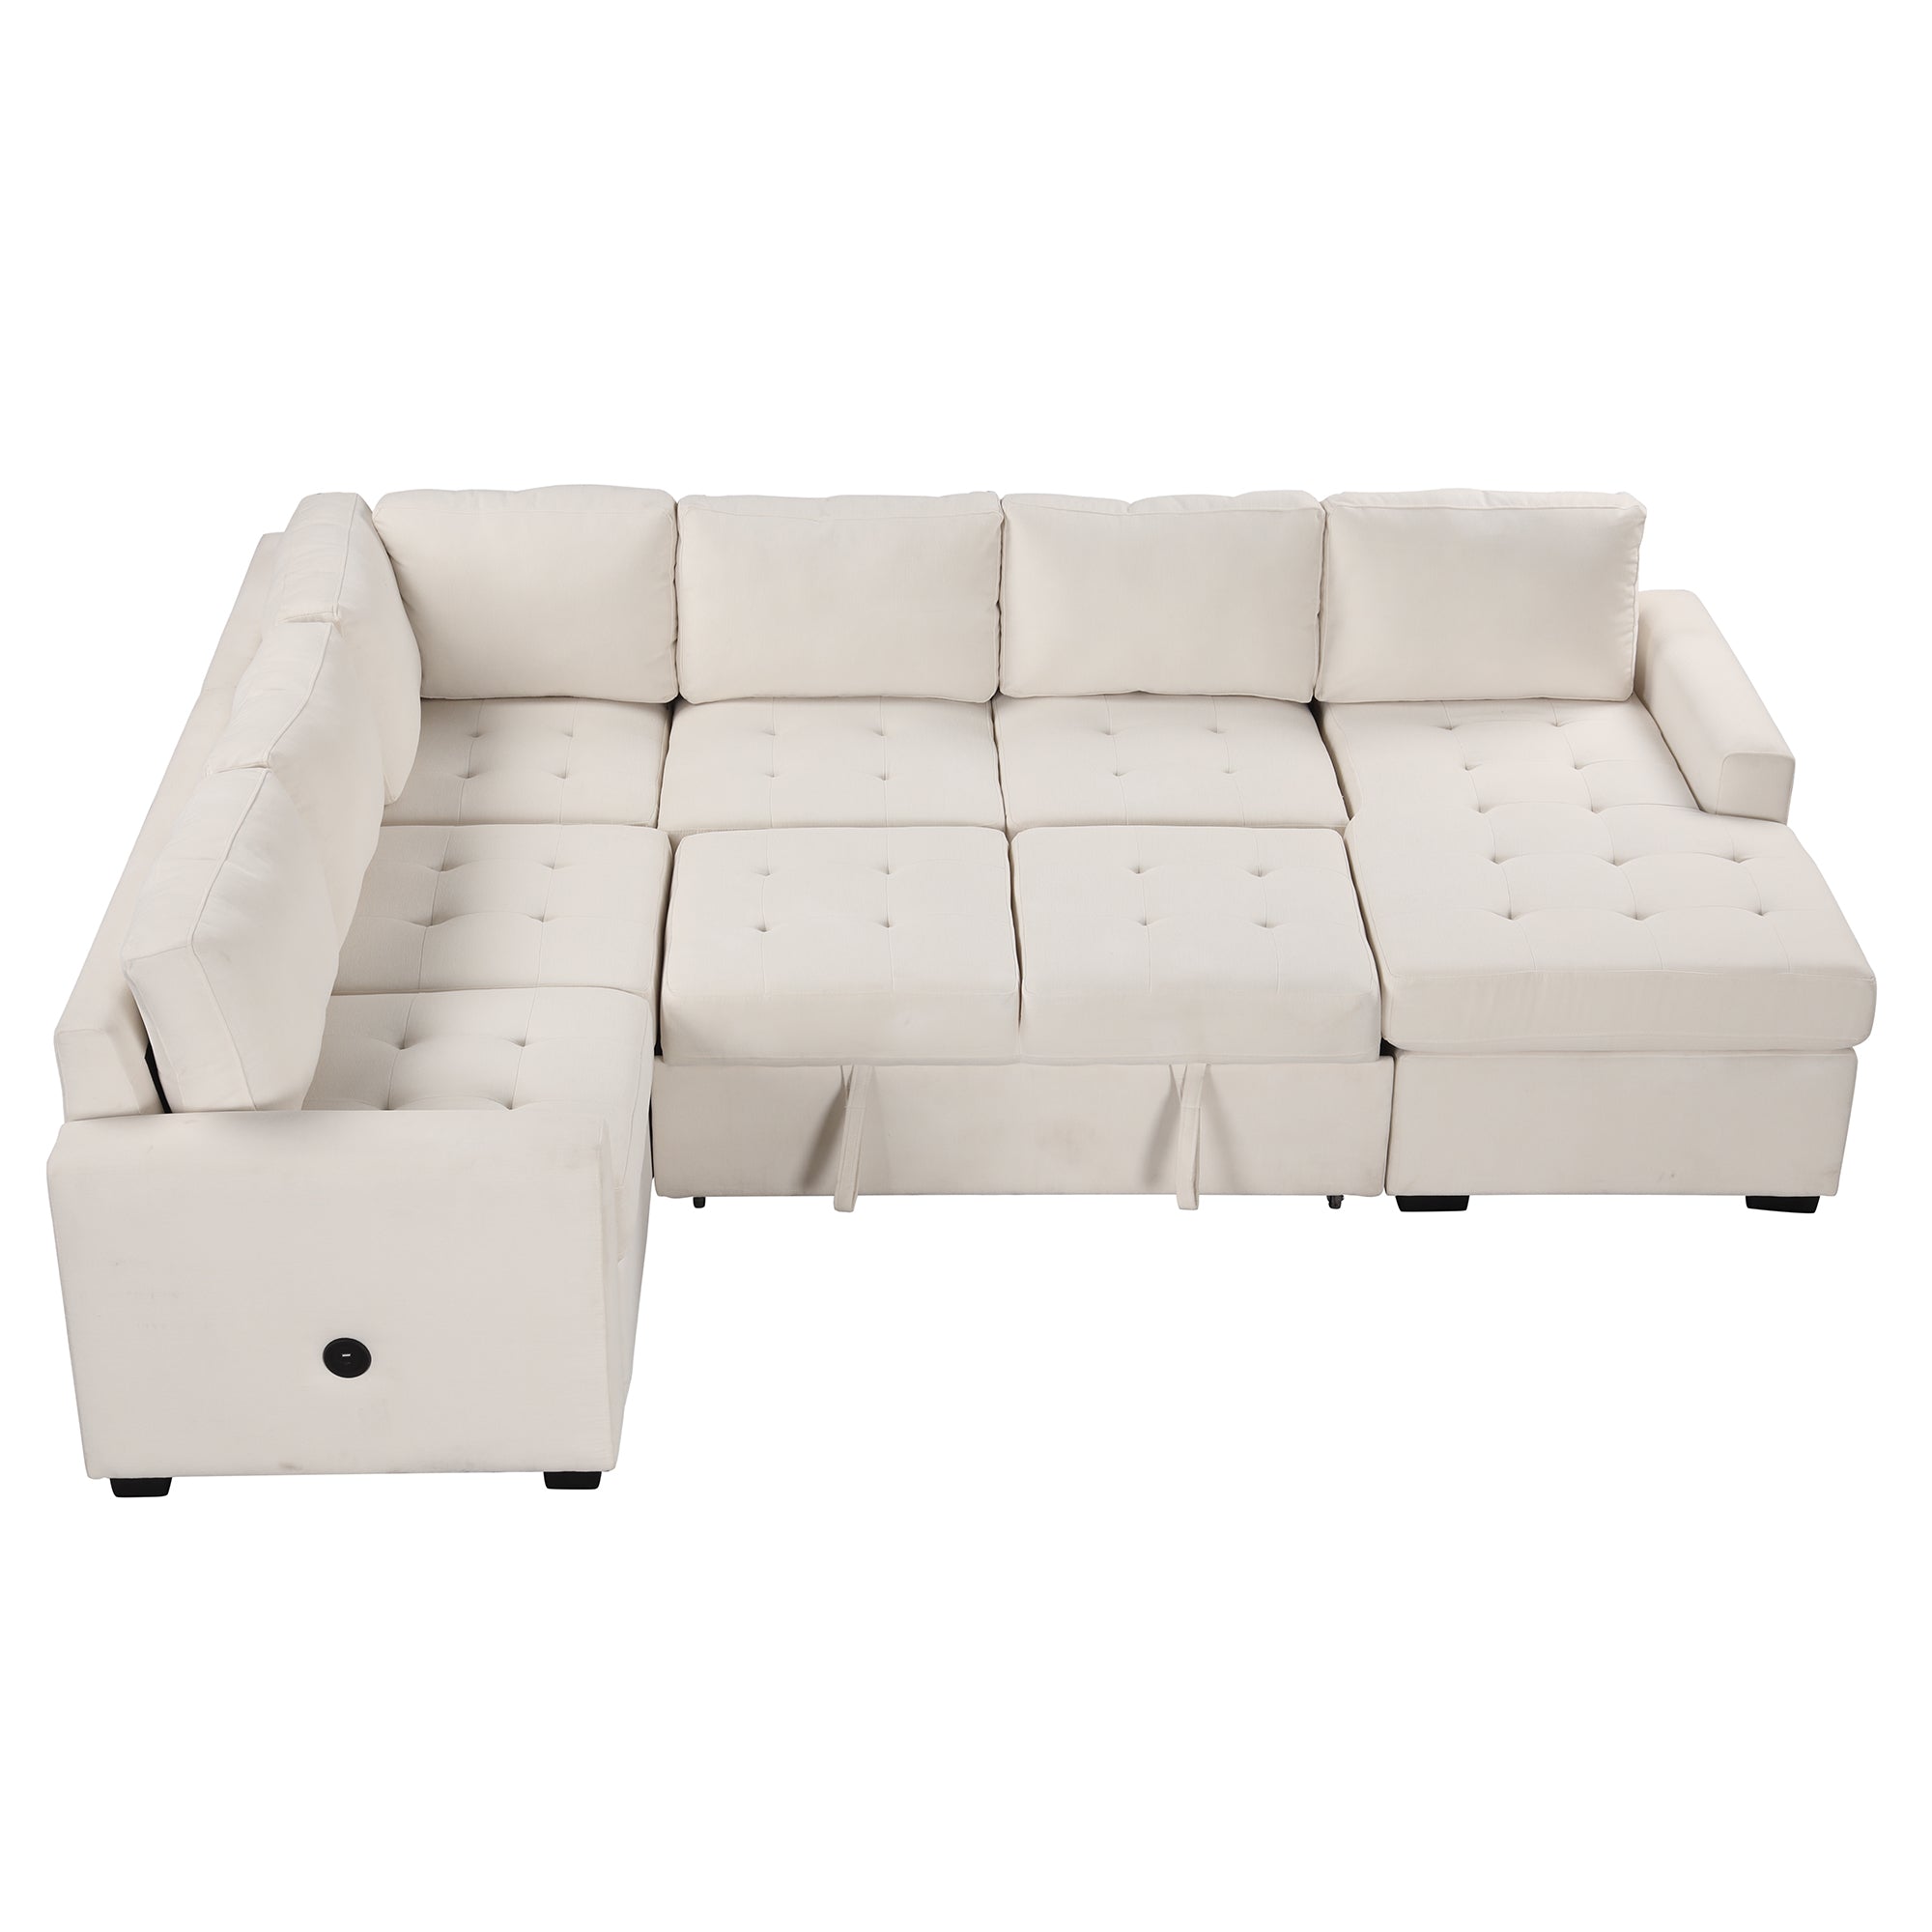 Bellemave 108.3" Modular Combination Sofa with Ottoman L-shaped Corner Combination, USB and Type-C Interfaces